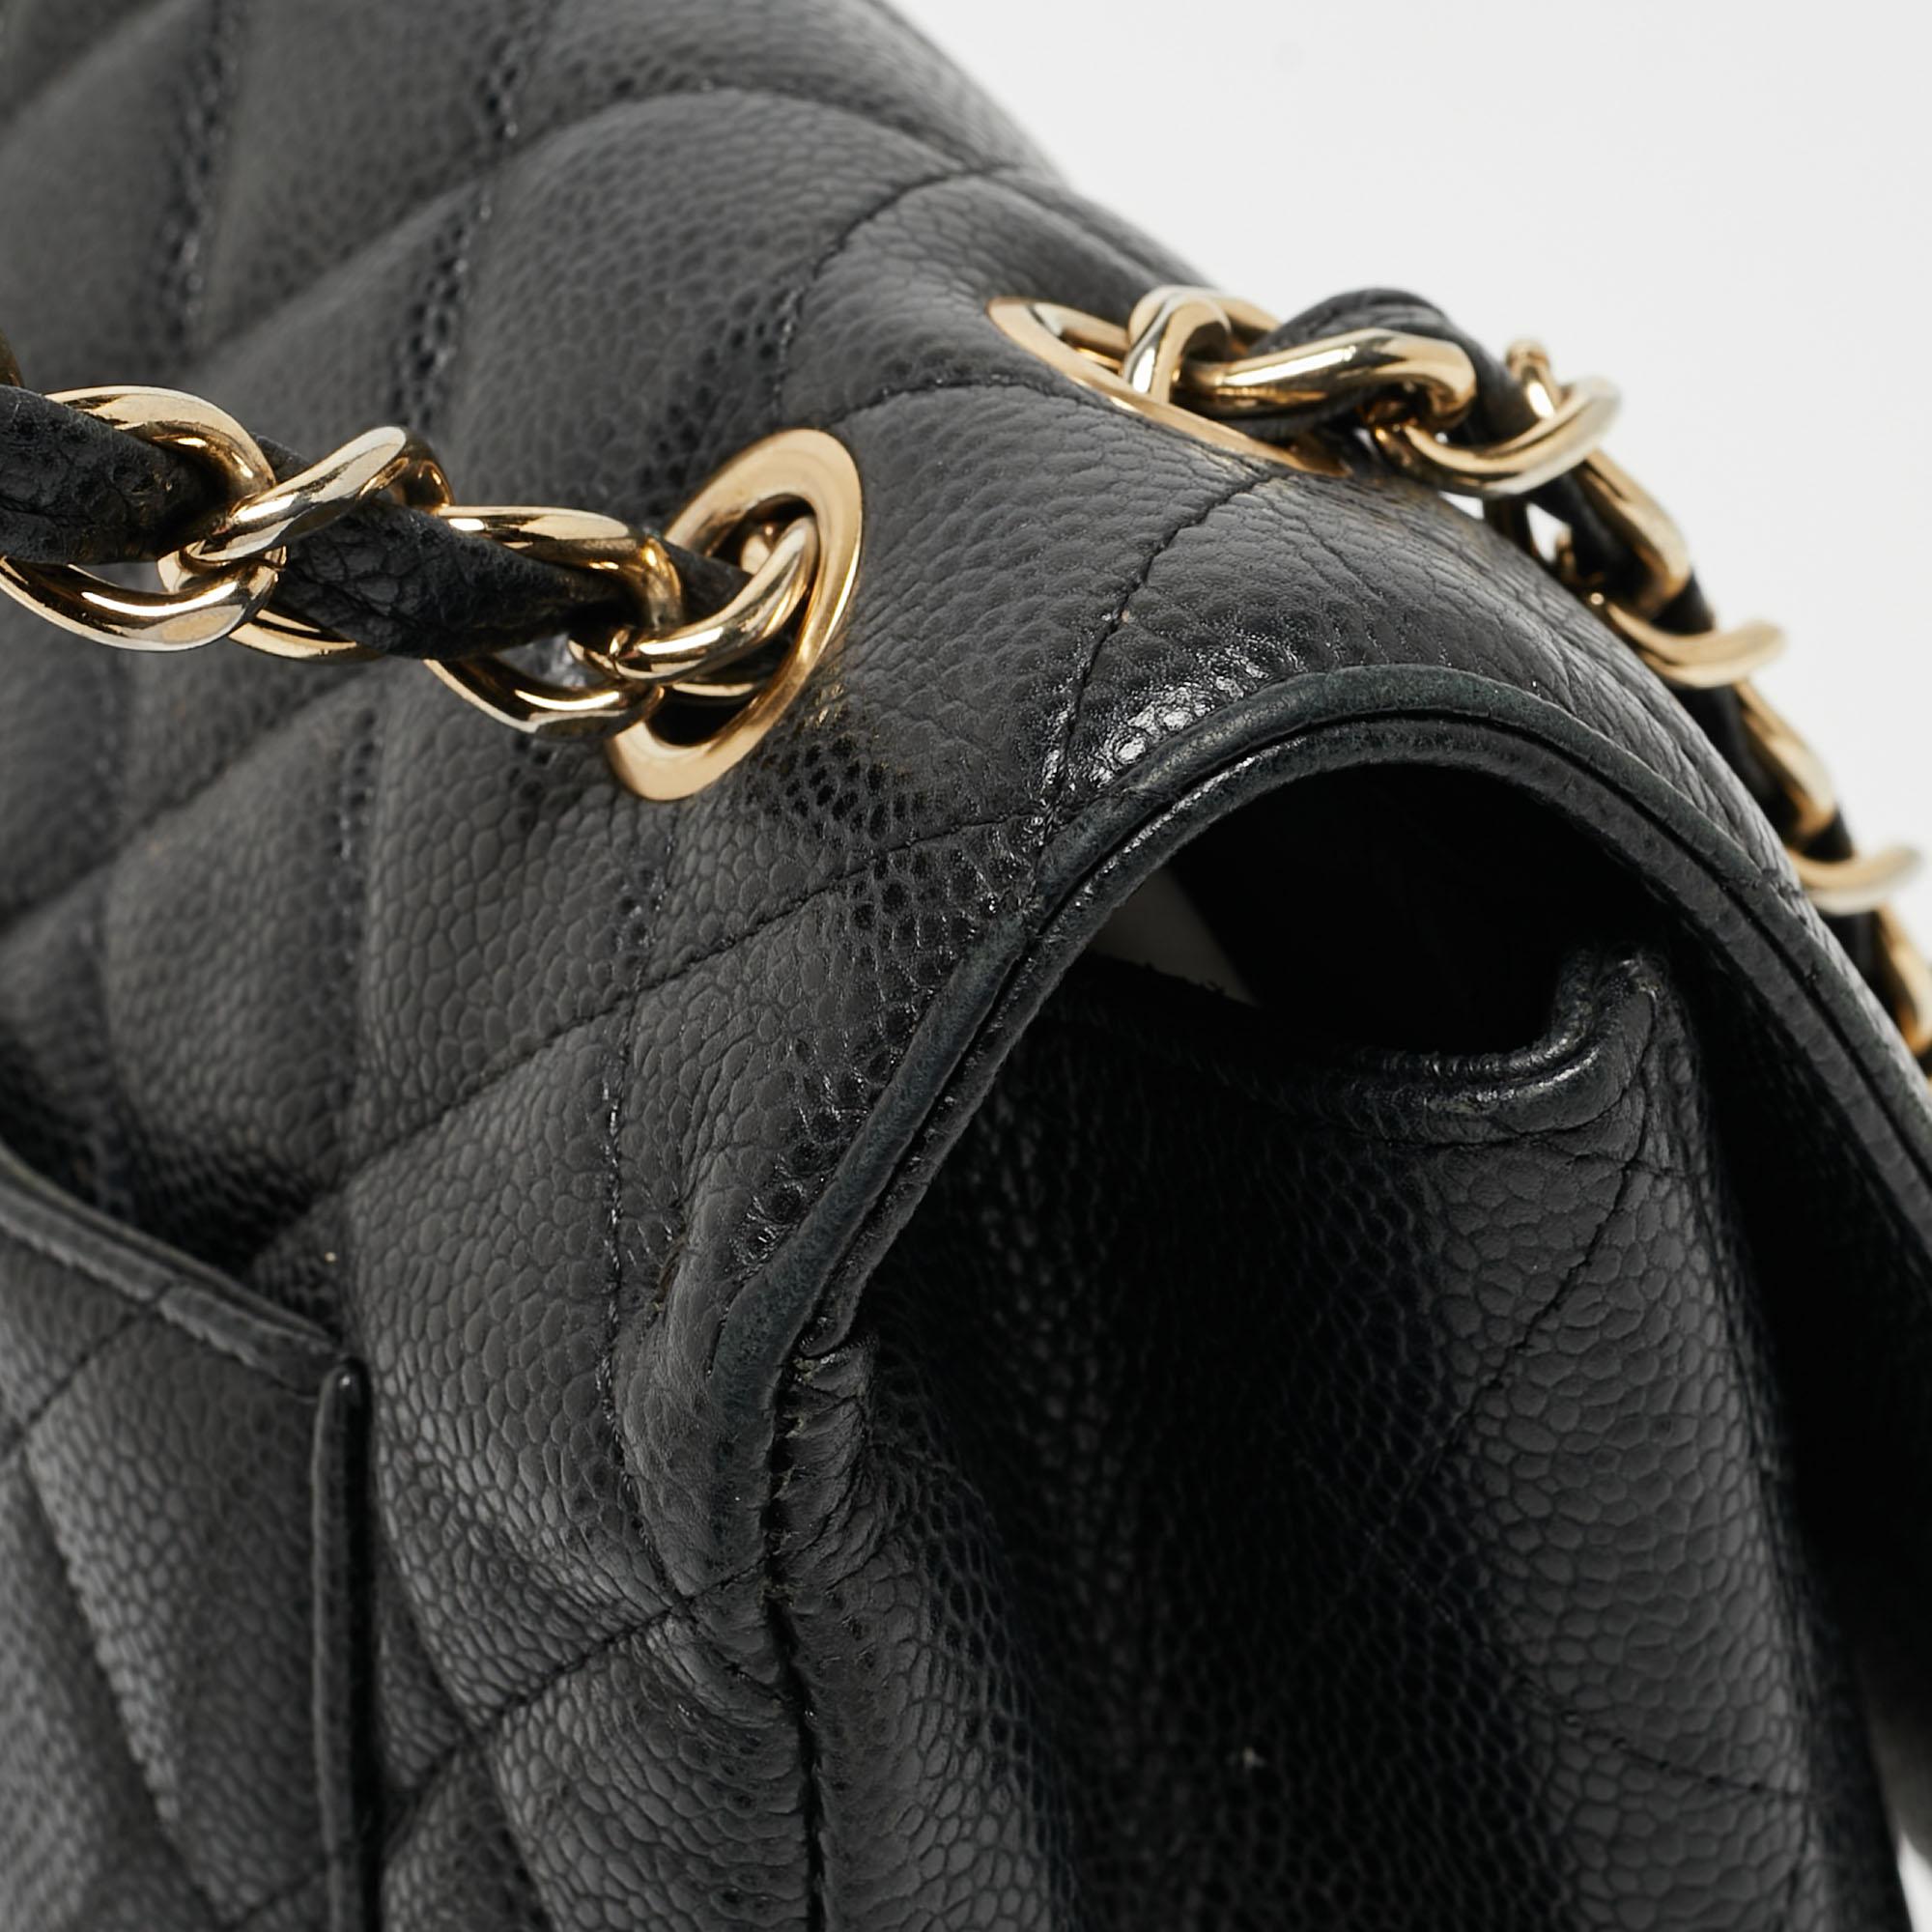 Chanel Black Quilted Caviar Leather Maxi Classic Single Flap Bag For Sale 11